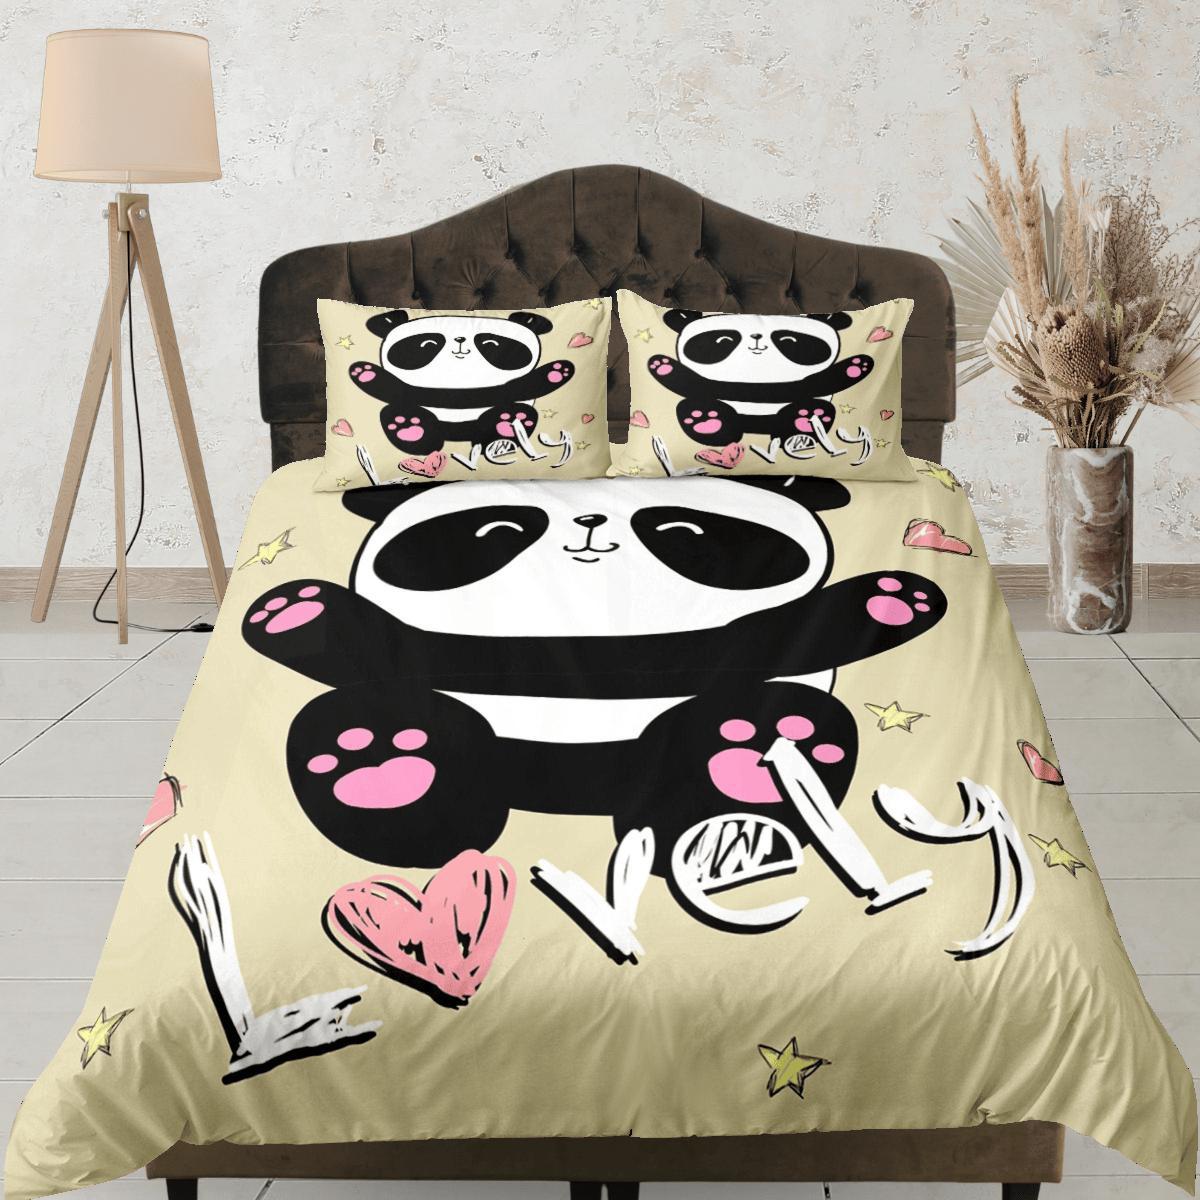 daintyduvet Lovely Cute Panda Duvet Cover Set Colorful Bedspread, Kids Bedding with Pillowcase